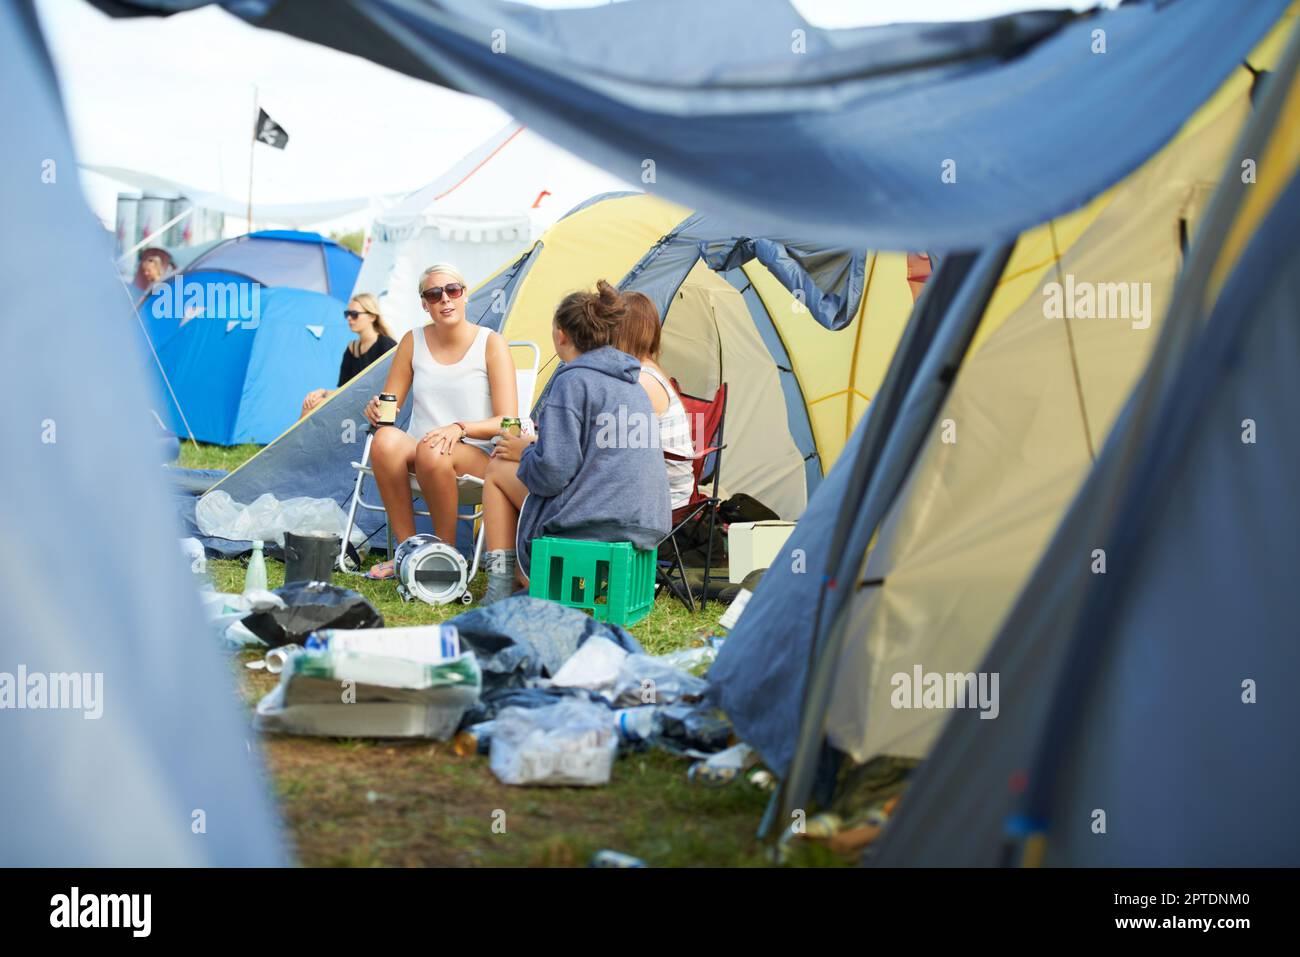 https://c8.alamy.com/comp/2PTDNM0/tent-city-mess-friends-drinking-and-talking-surrounded-by-tents-at-an-outdoor-festival-2PTDNM0.jpg